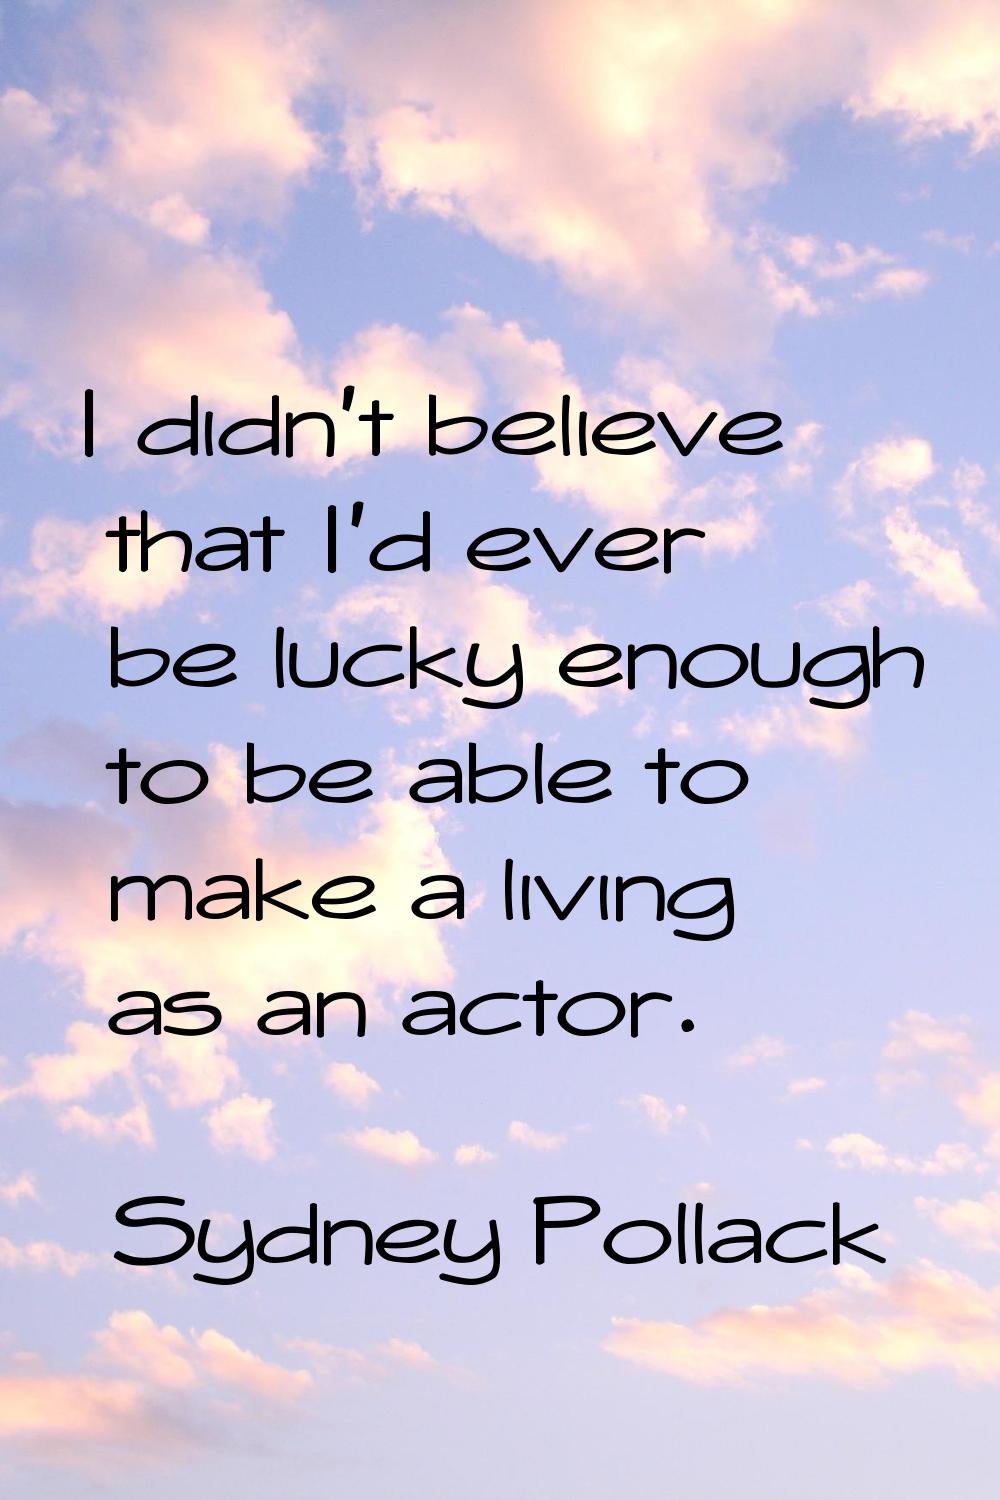 I didn't believe that I'd ever be lucky enough to be able to make a living as an actor.